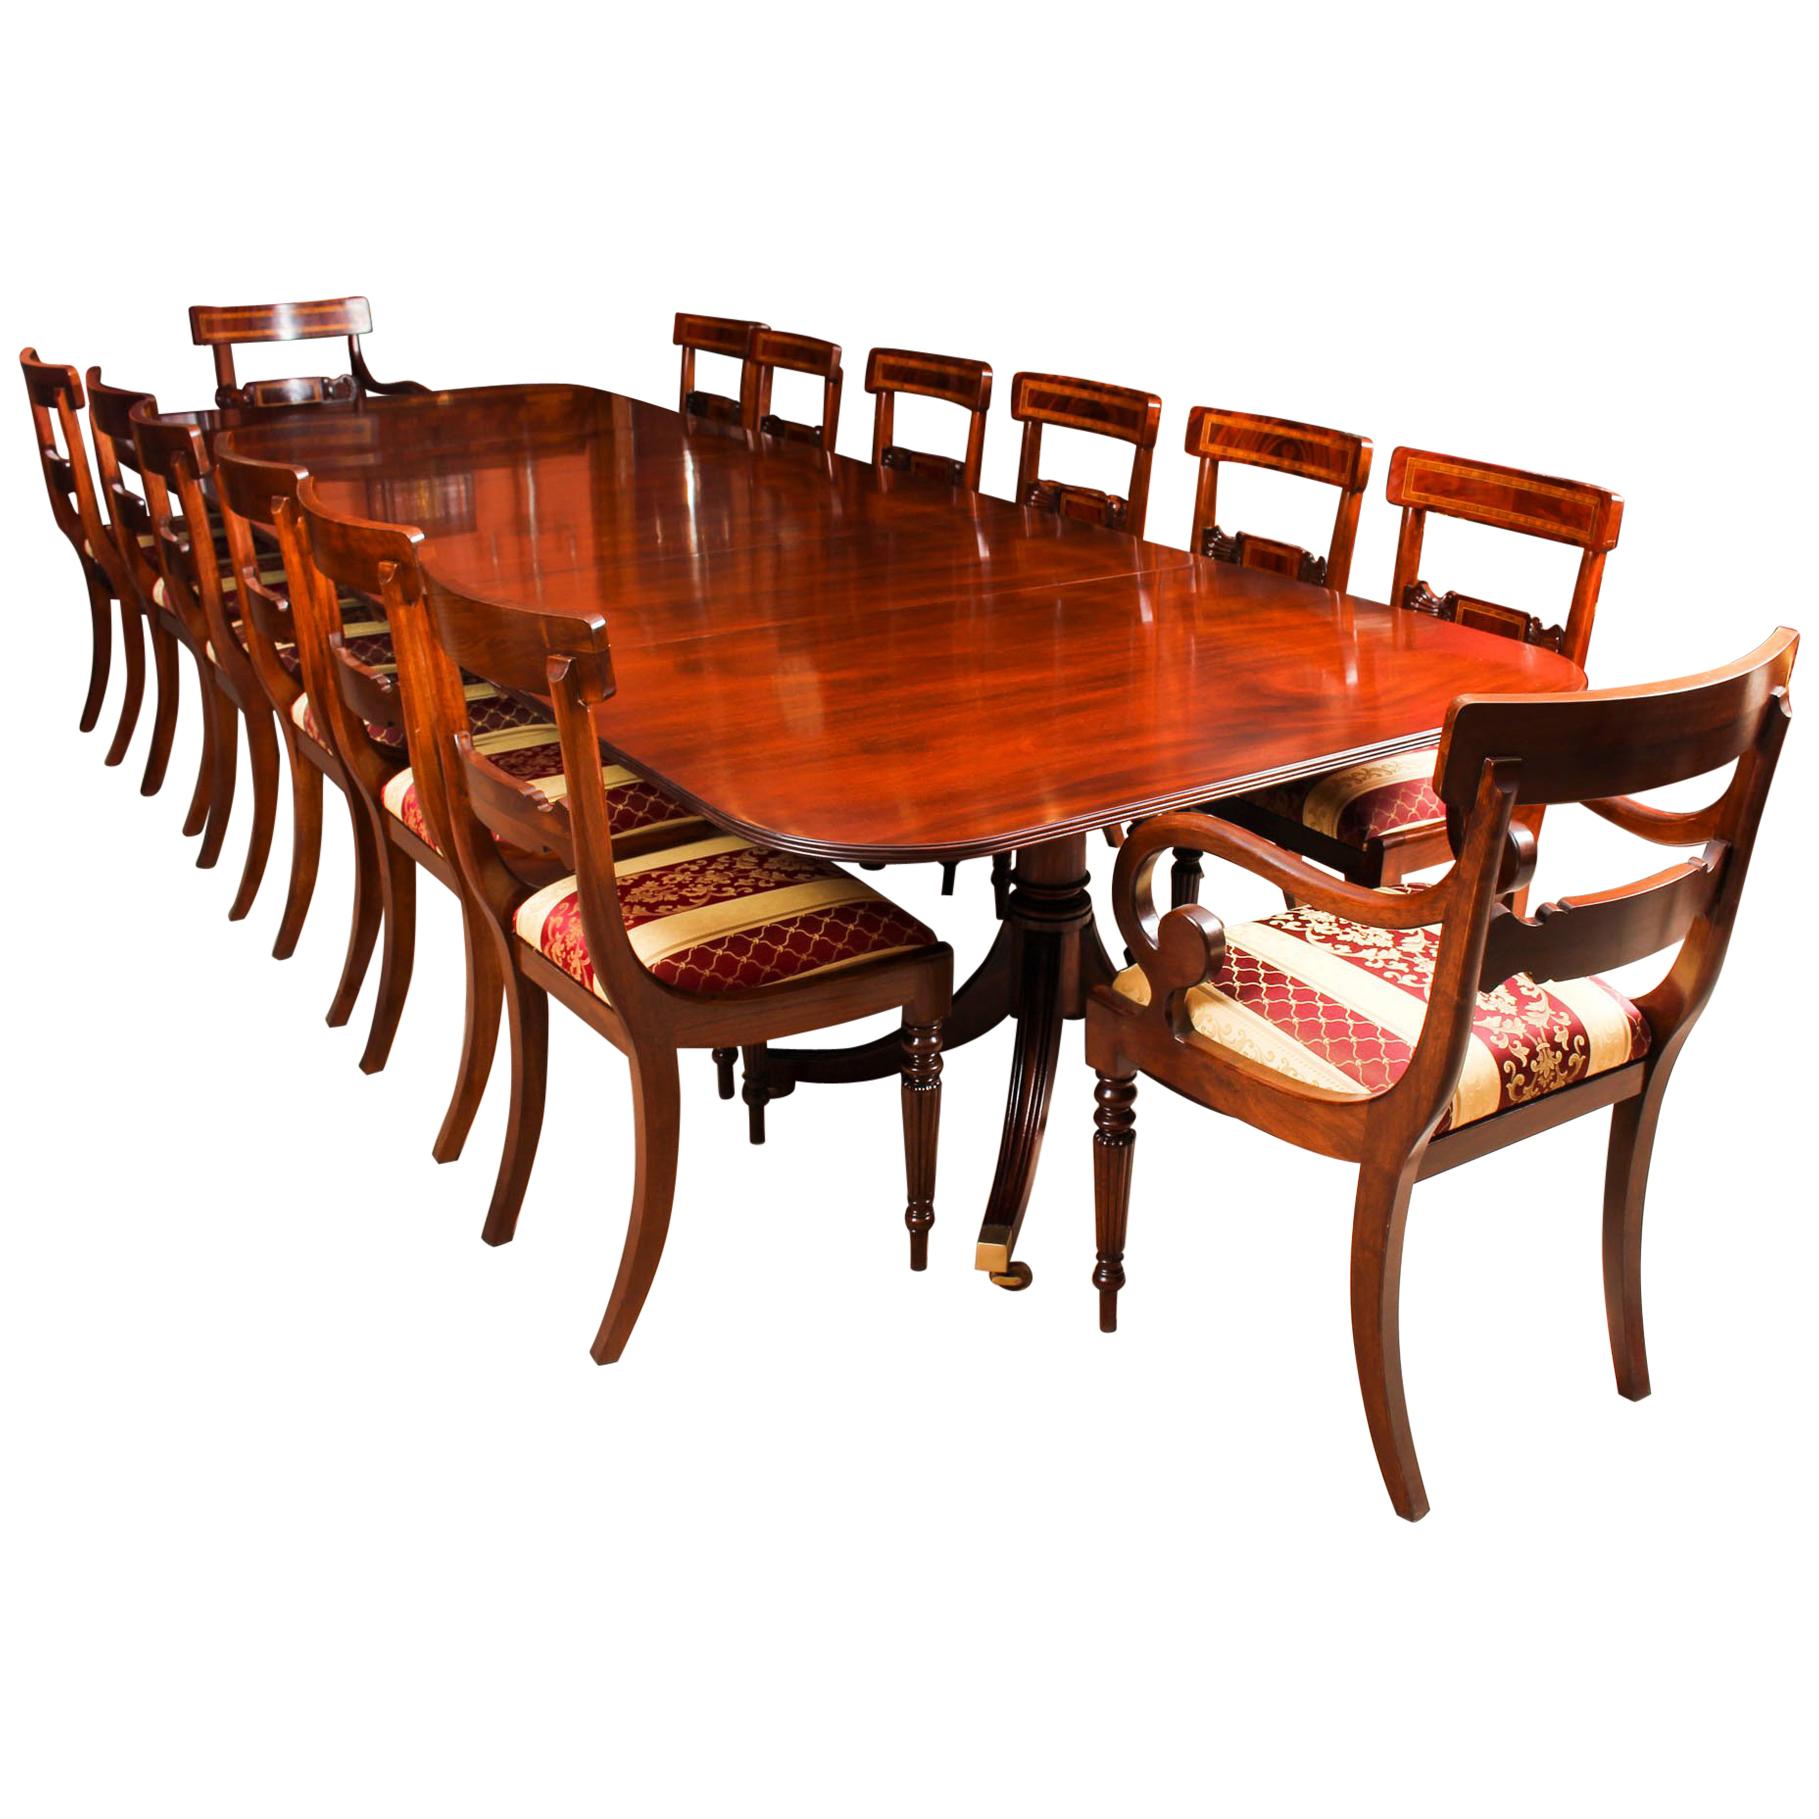 Vintage 3 Pillar Dining Table by William Tillman and 12 Chairs, 20th Century